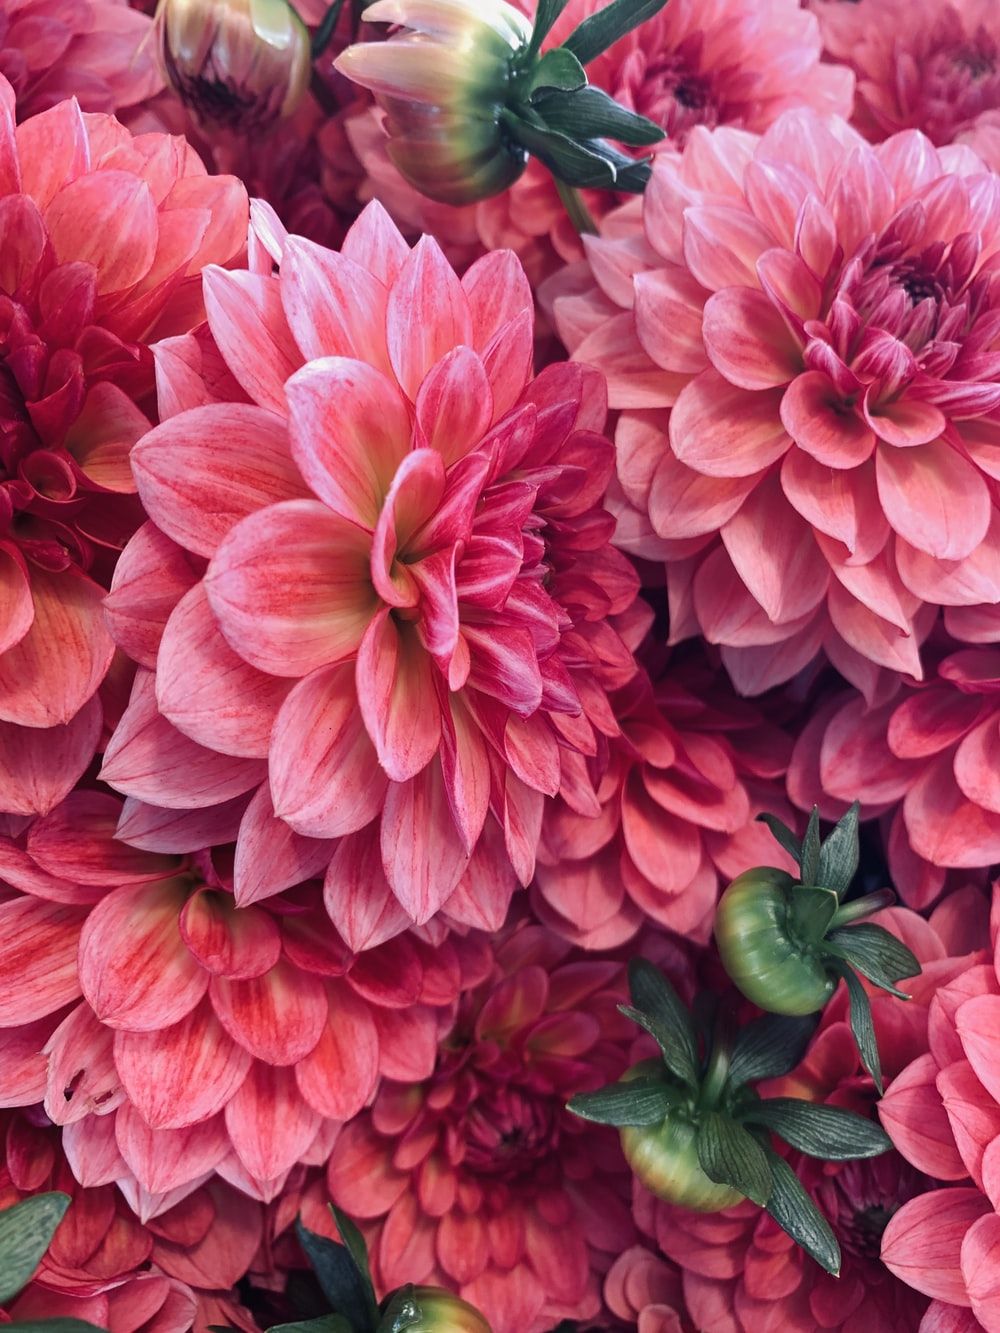 550 Dahlia Pictures  Download Free Images on Unsplash